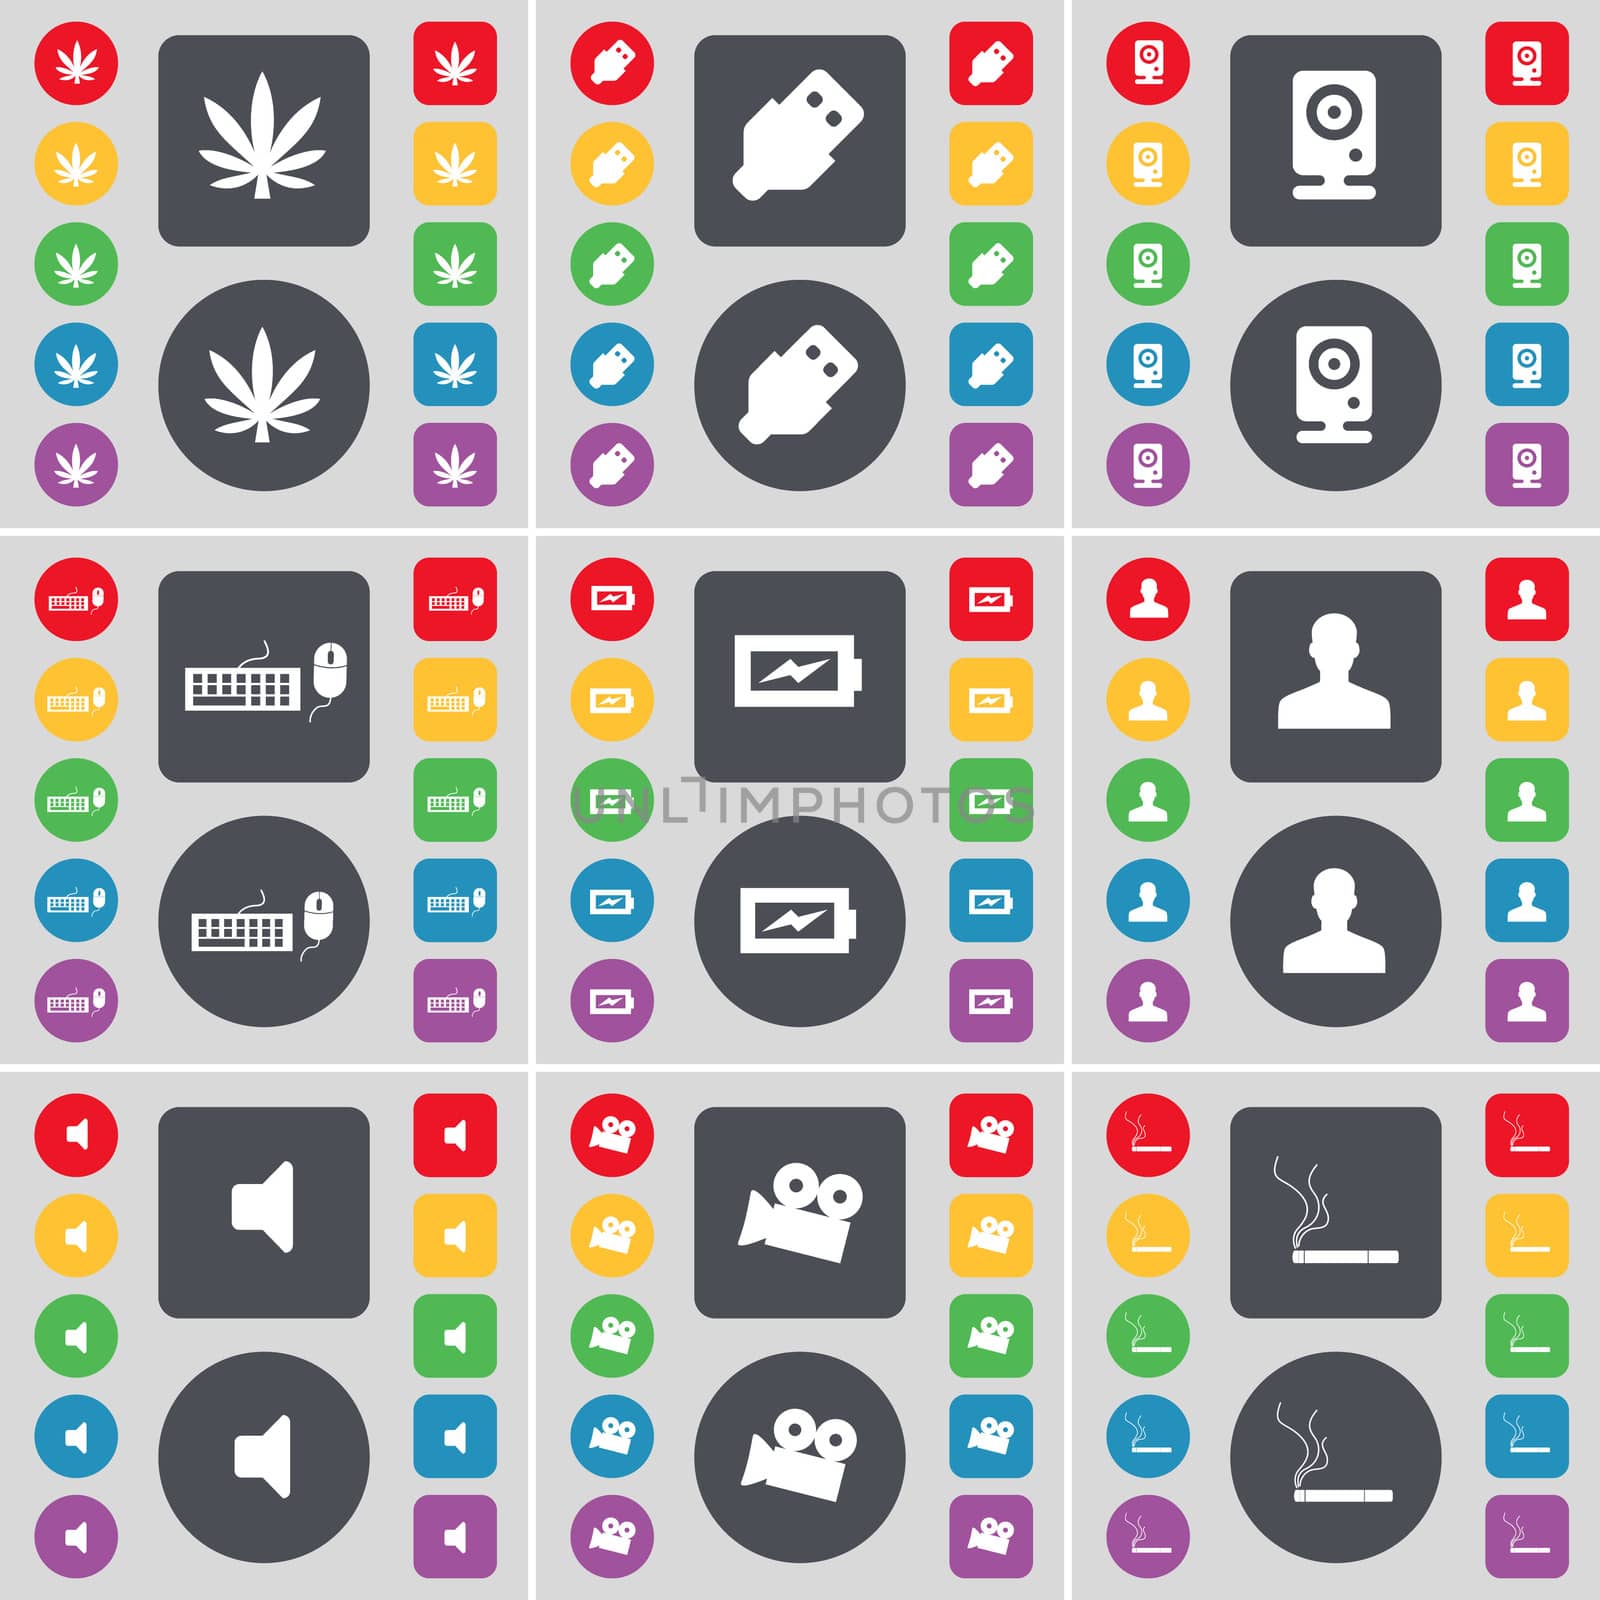 Marijuana, USB, Speaker, Keyboard, Charging, Avatar, Sound, Film camera, Cigarette icon symbol. A large set of flat, colored buttons for your design.  by serhii_lohvyniuk